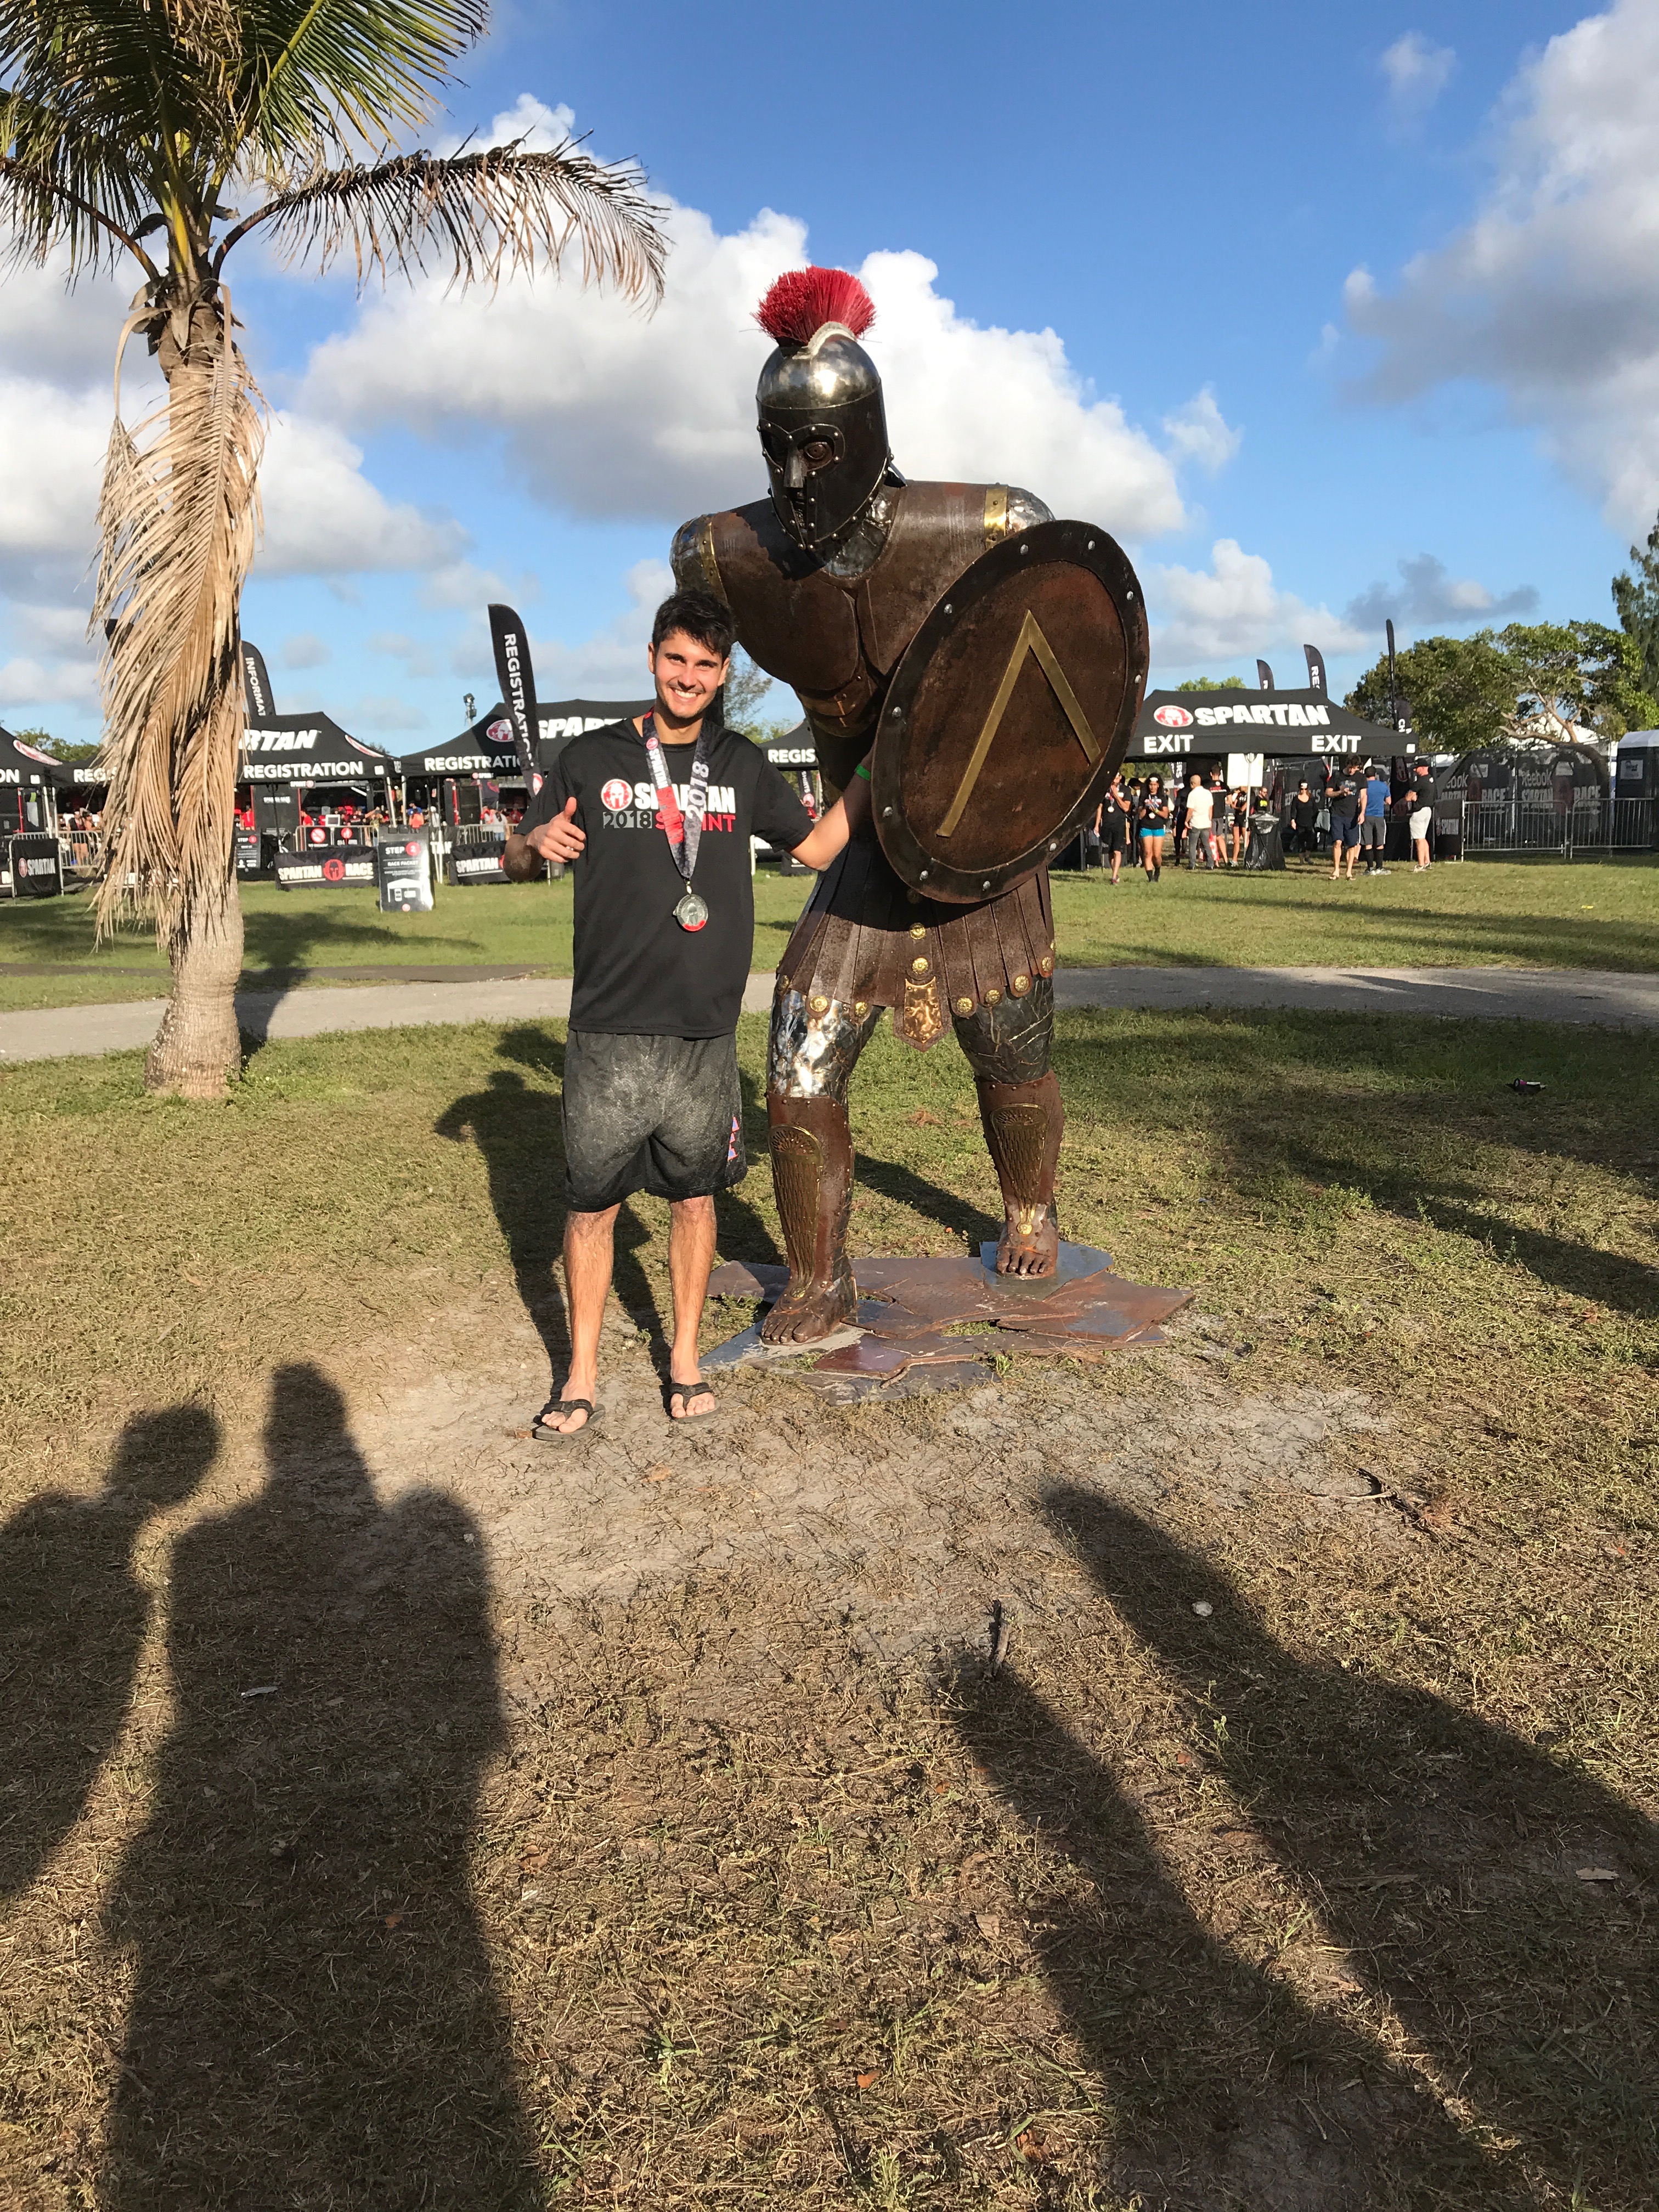 After the spartan race sprint in Miami